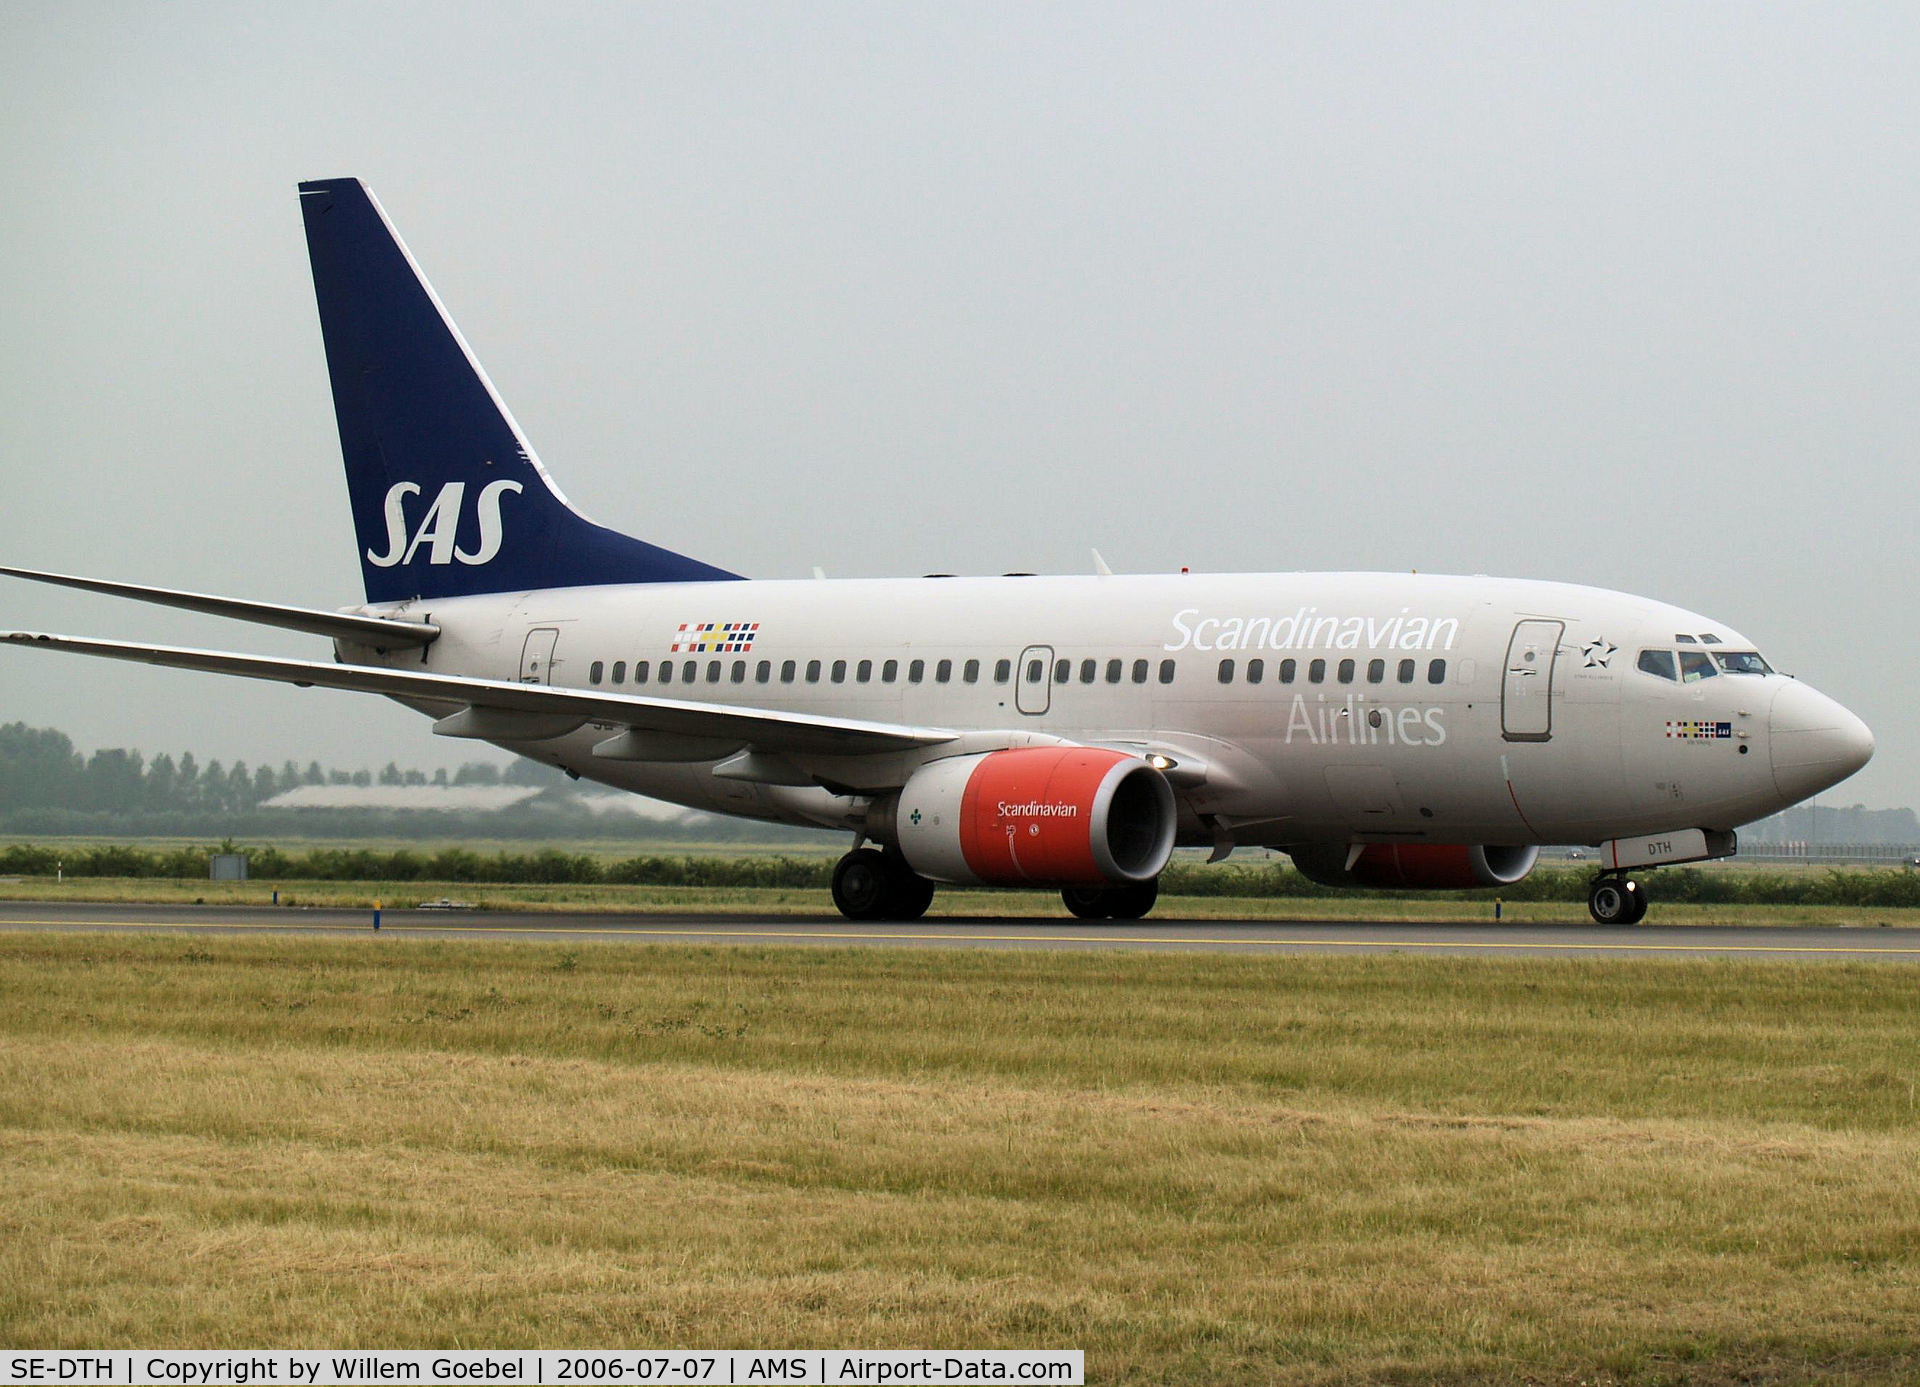 SE-DTH, 1999 Boeing 737-683 C/N 28313, Taxi to the gate of Amsterdam Airport